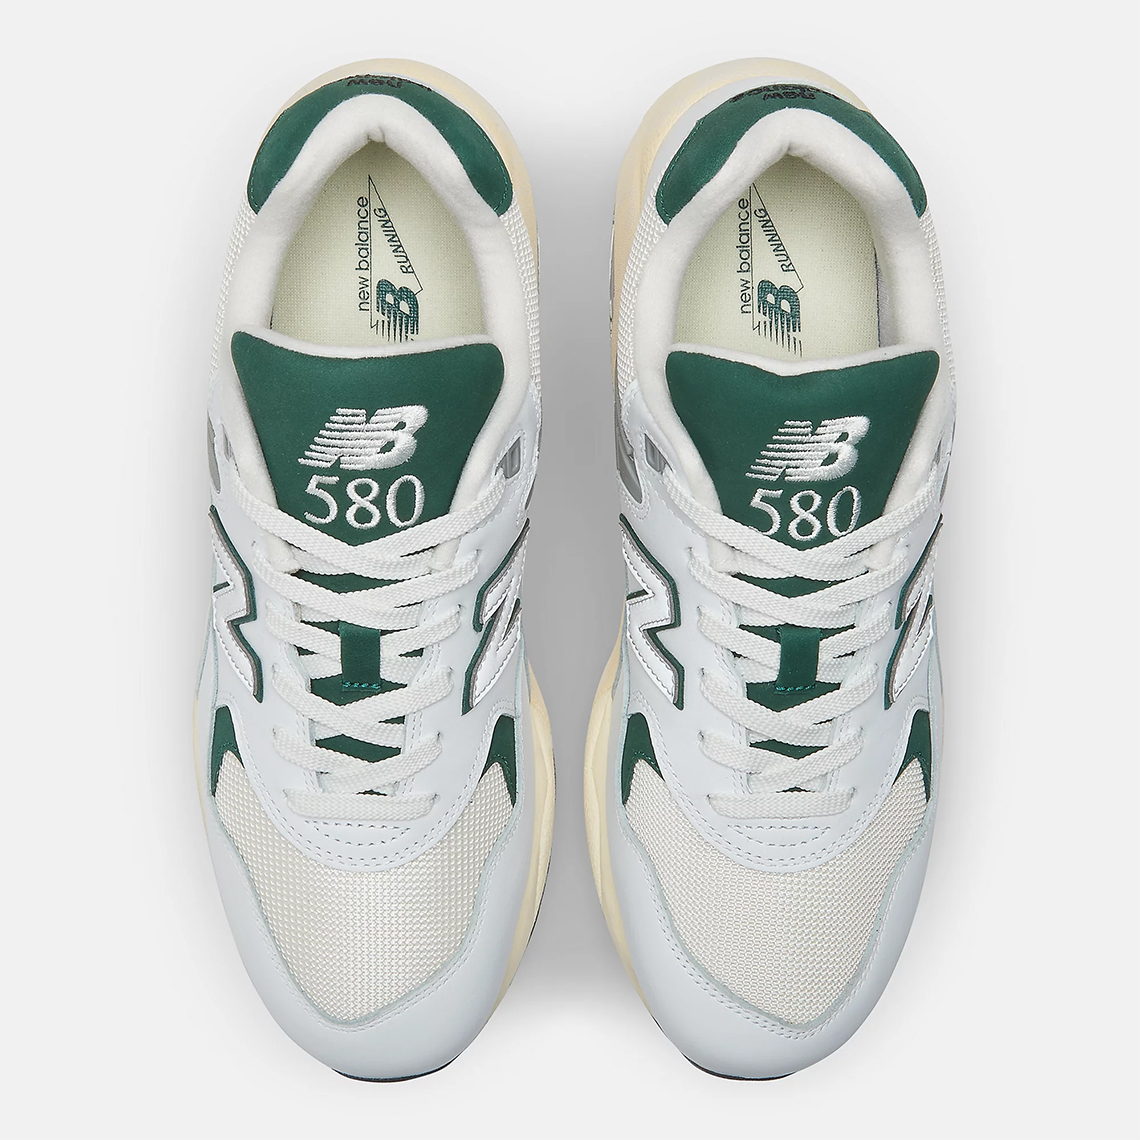 New Balance 580 White Green Mt580rca Release Date 3